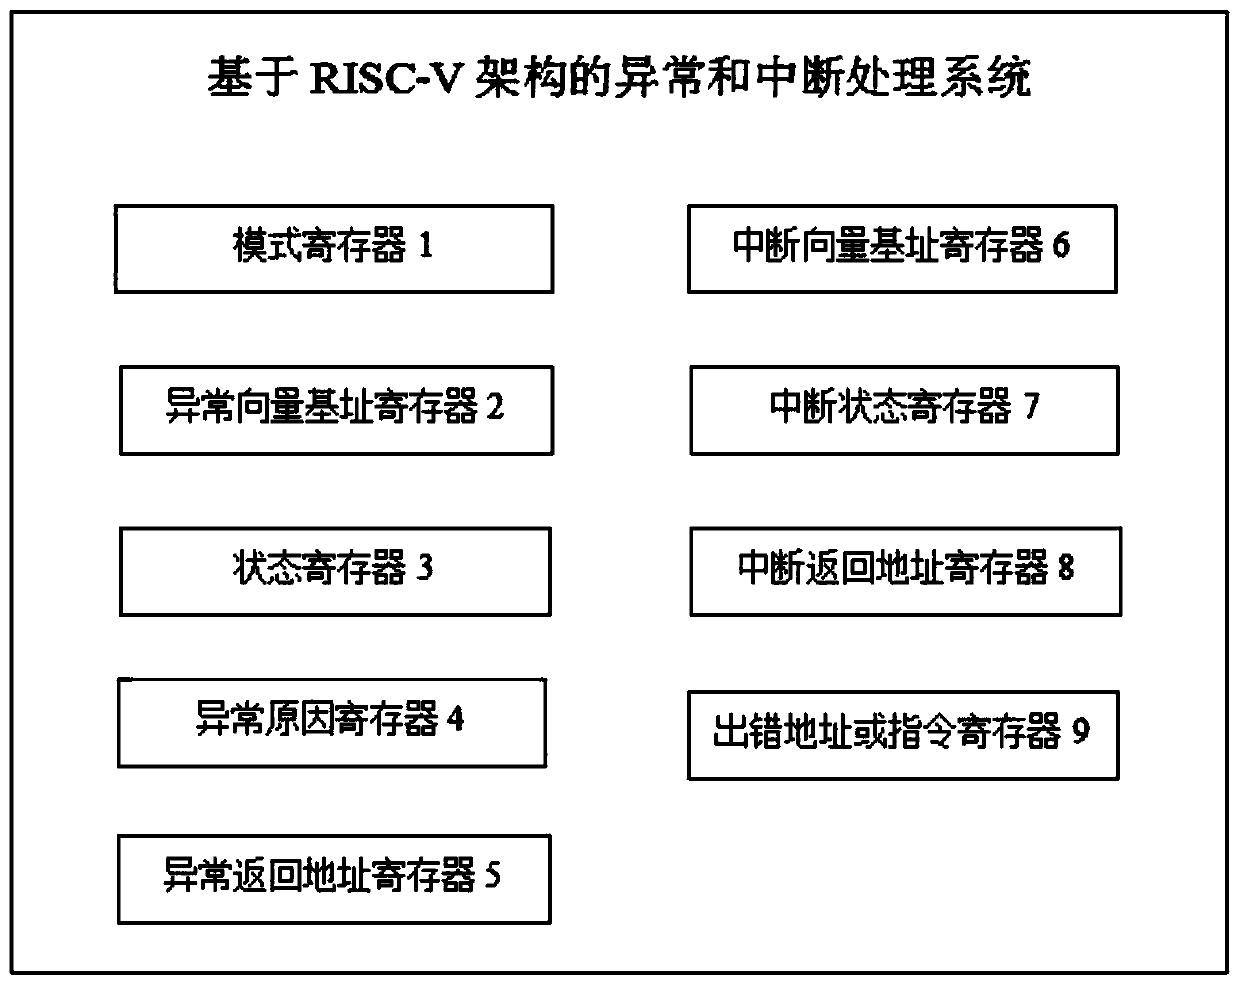 Exception and interruption processing system and method based on RISC-V architecture